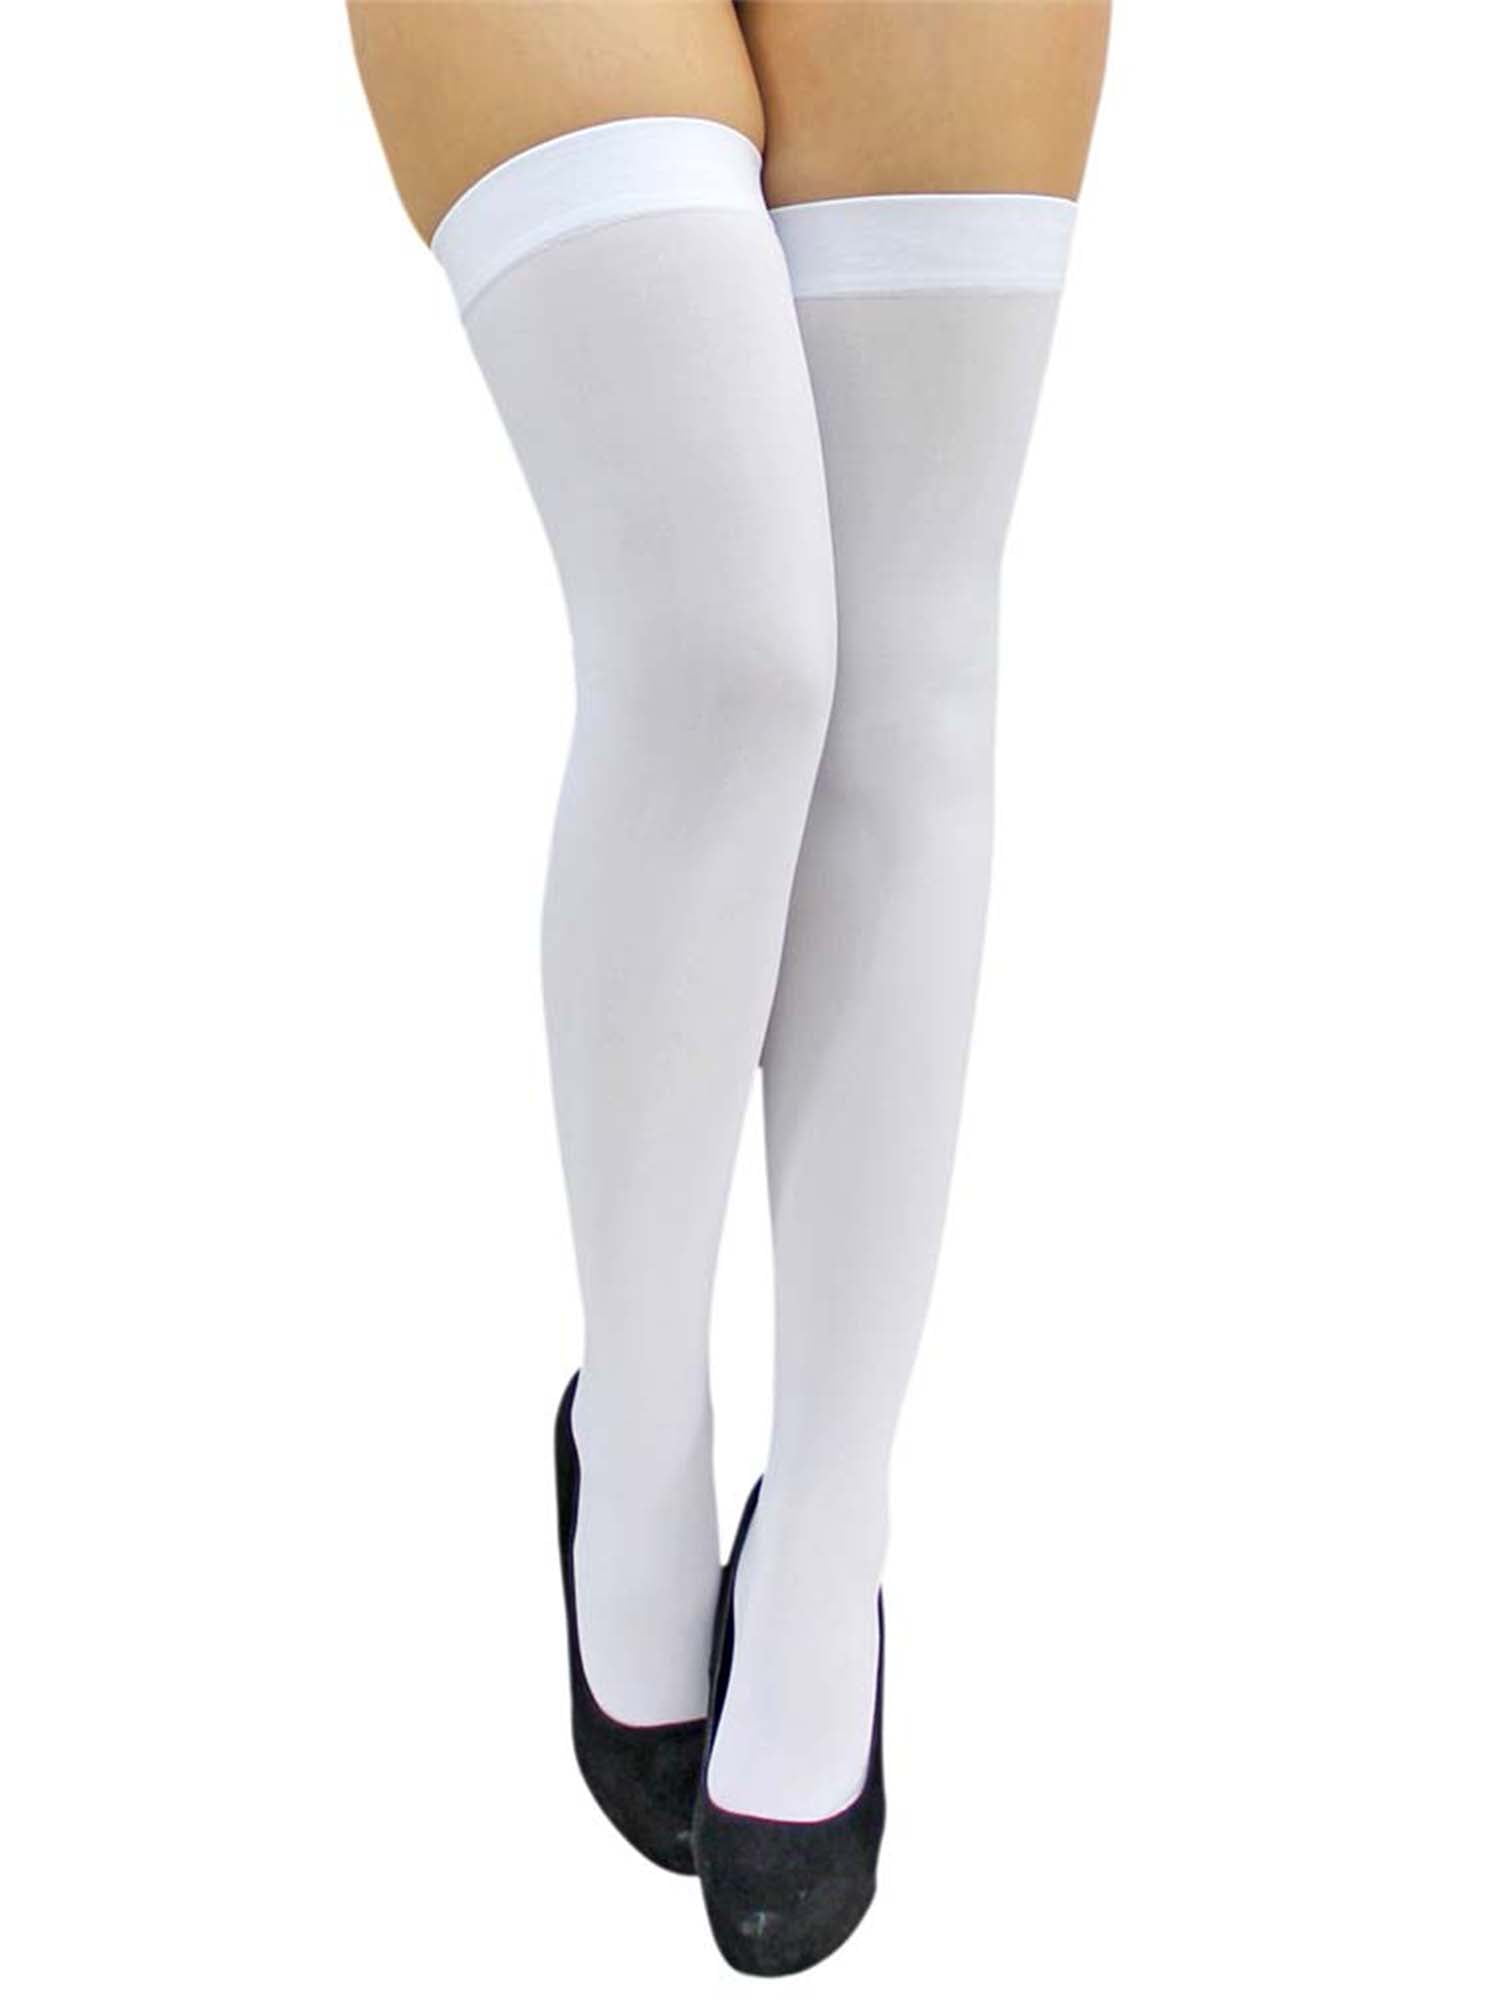 Berkshire nude White thigh high stockings size a exciting! 